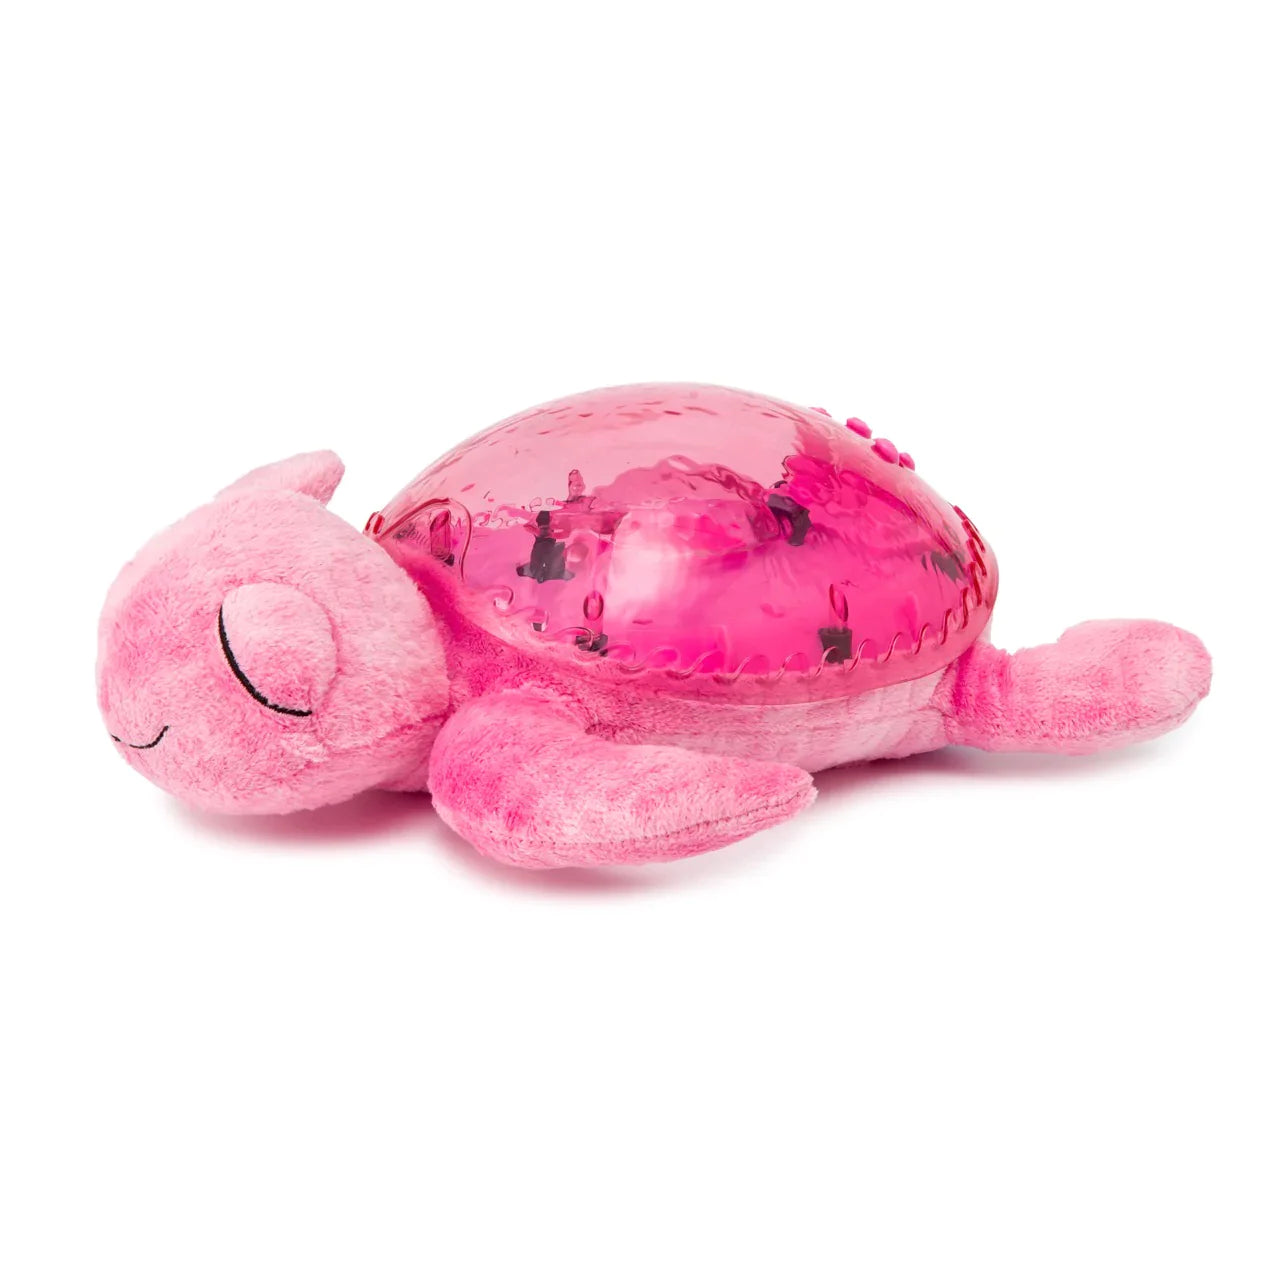 Tranquil Turtle™ - Pink Tranquil Turtle Nightlight for babies and kids cloud.b   